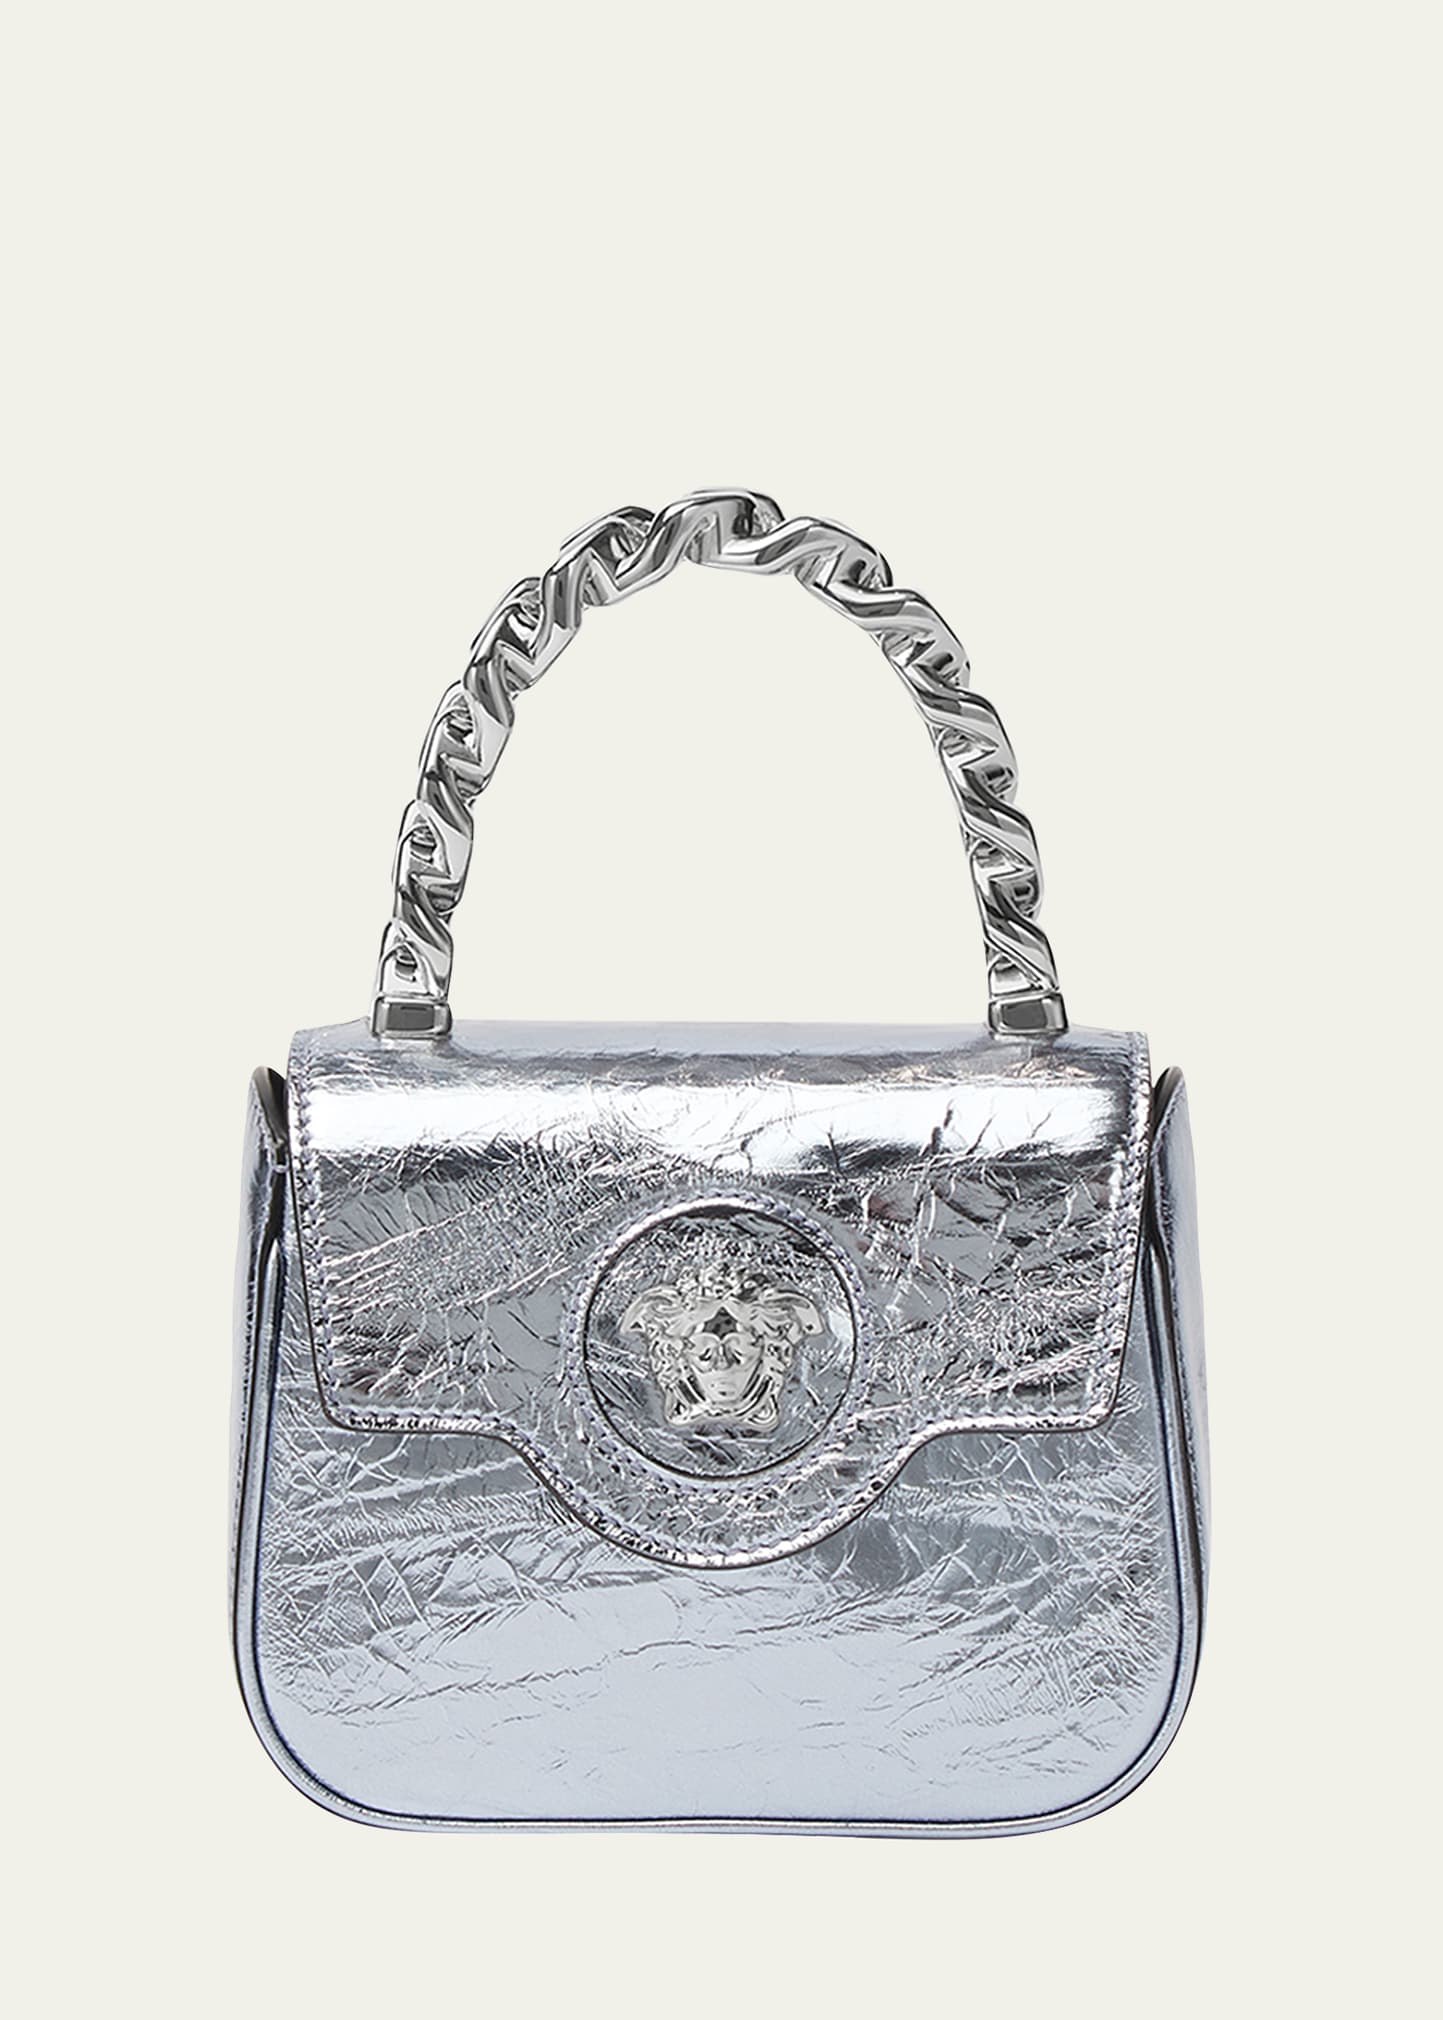 Gianni Versace Silver Tone Women Bag Small Hand Bag Made in Italy